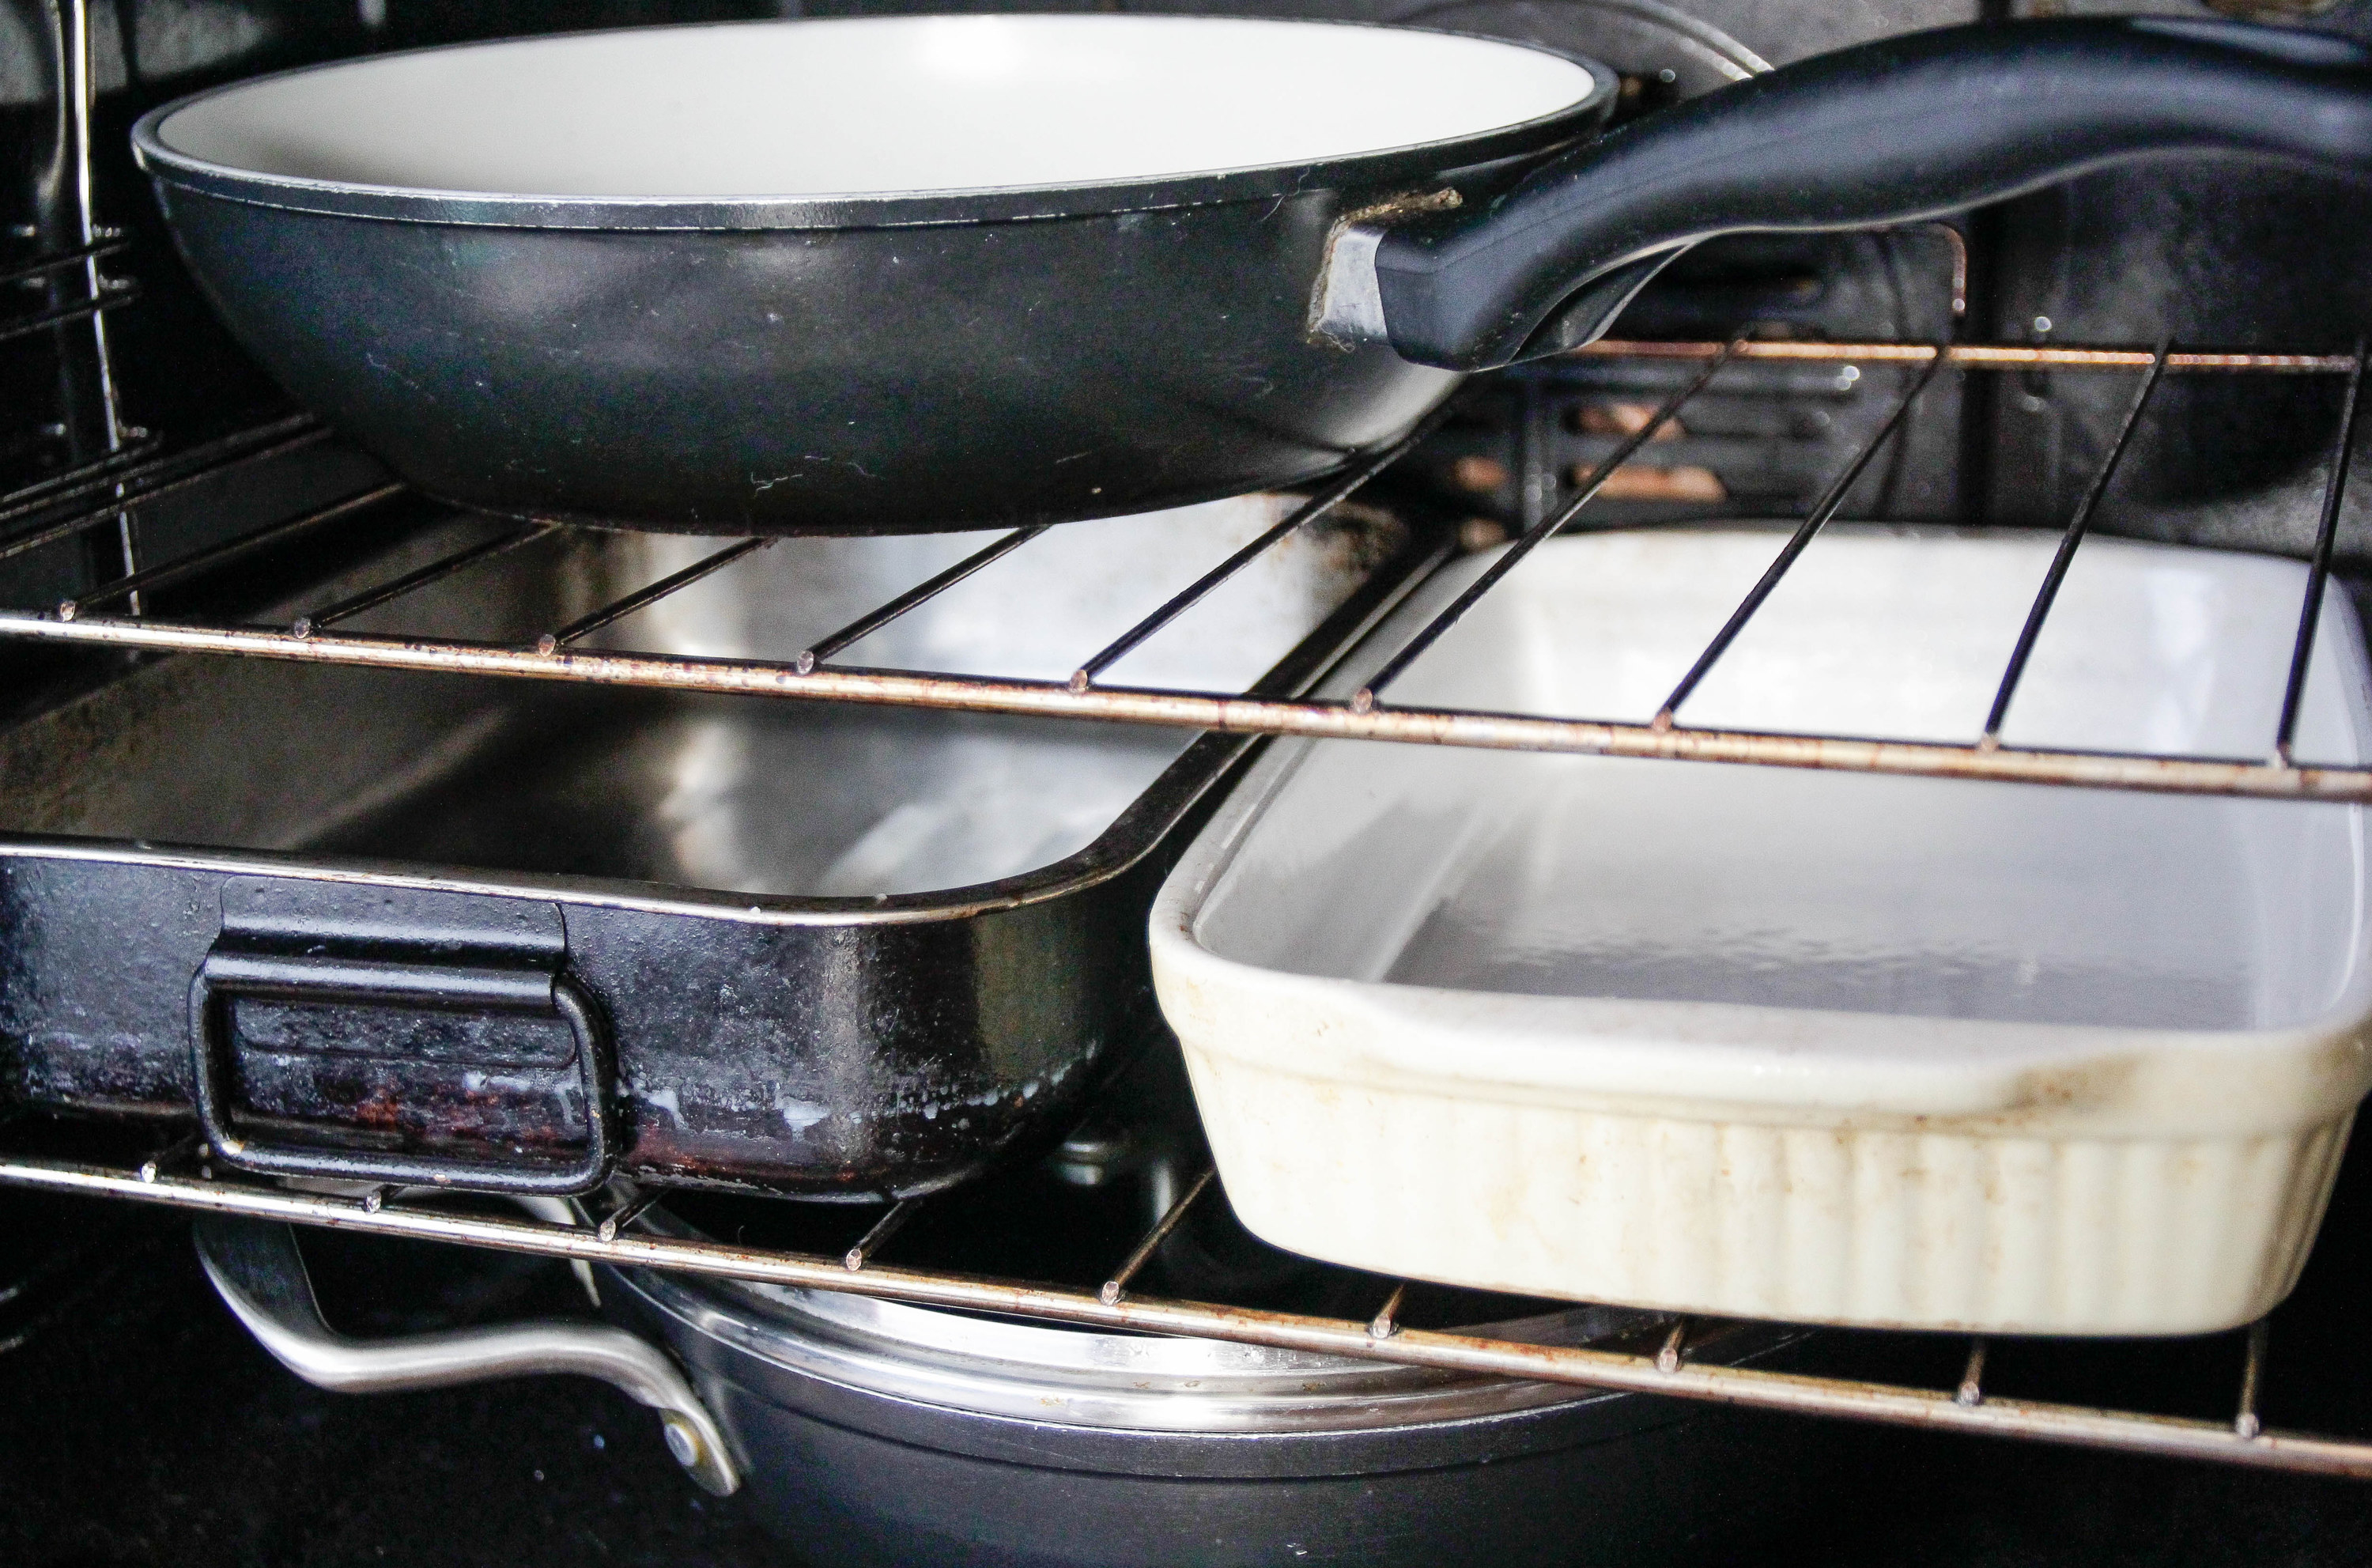 Frying pan, andbaking trays in an oven